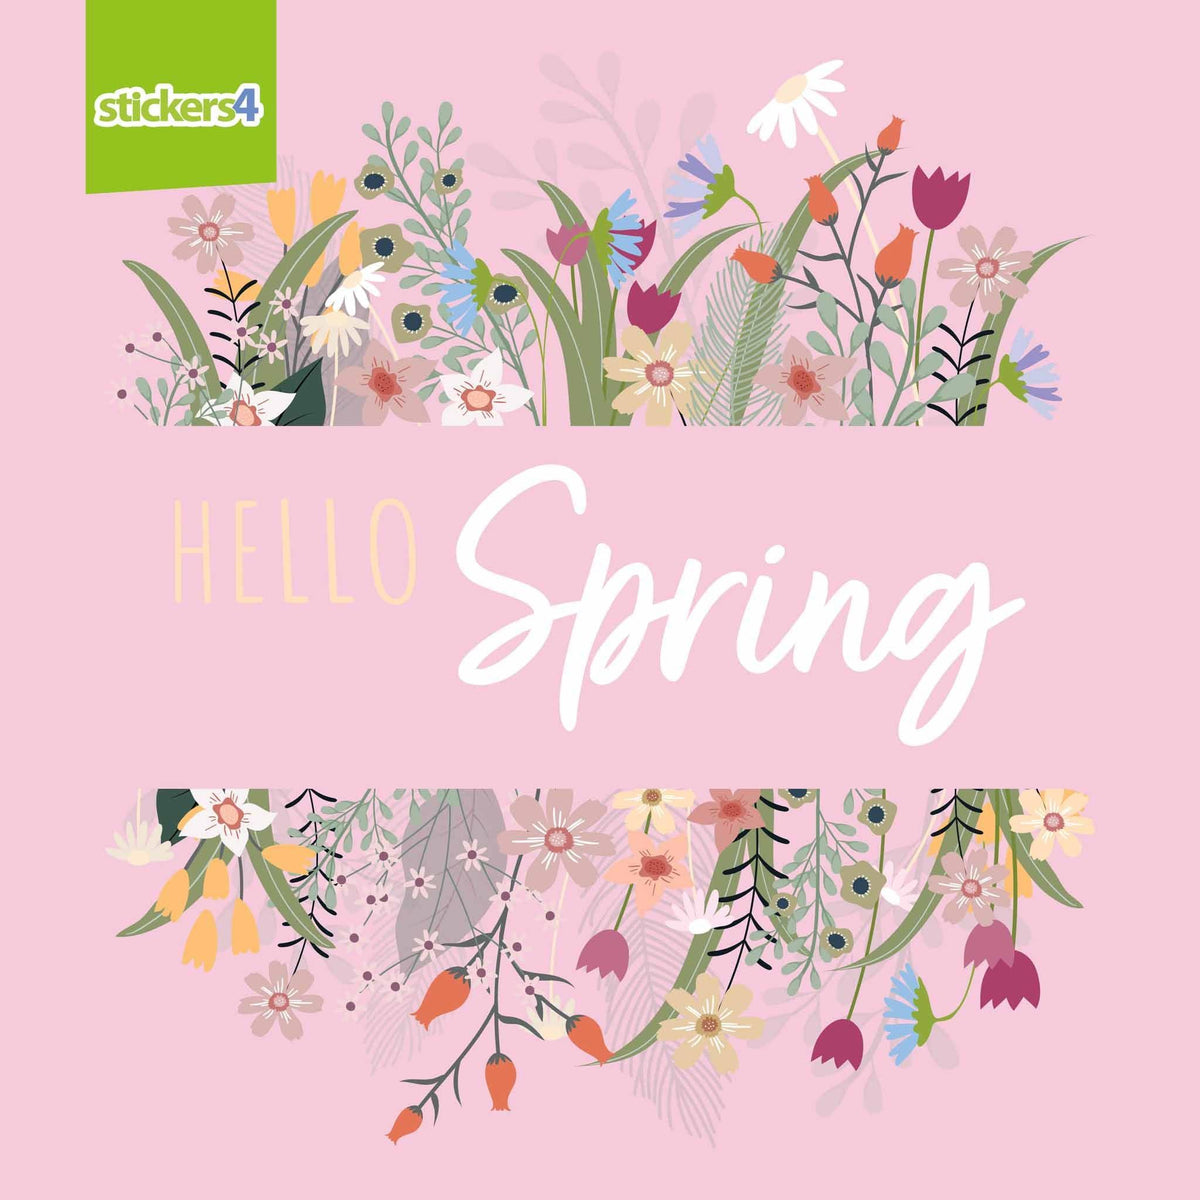 Hello Spring Script with Flowers Window Stickers Spring Window Display